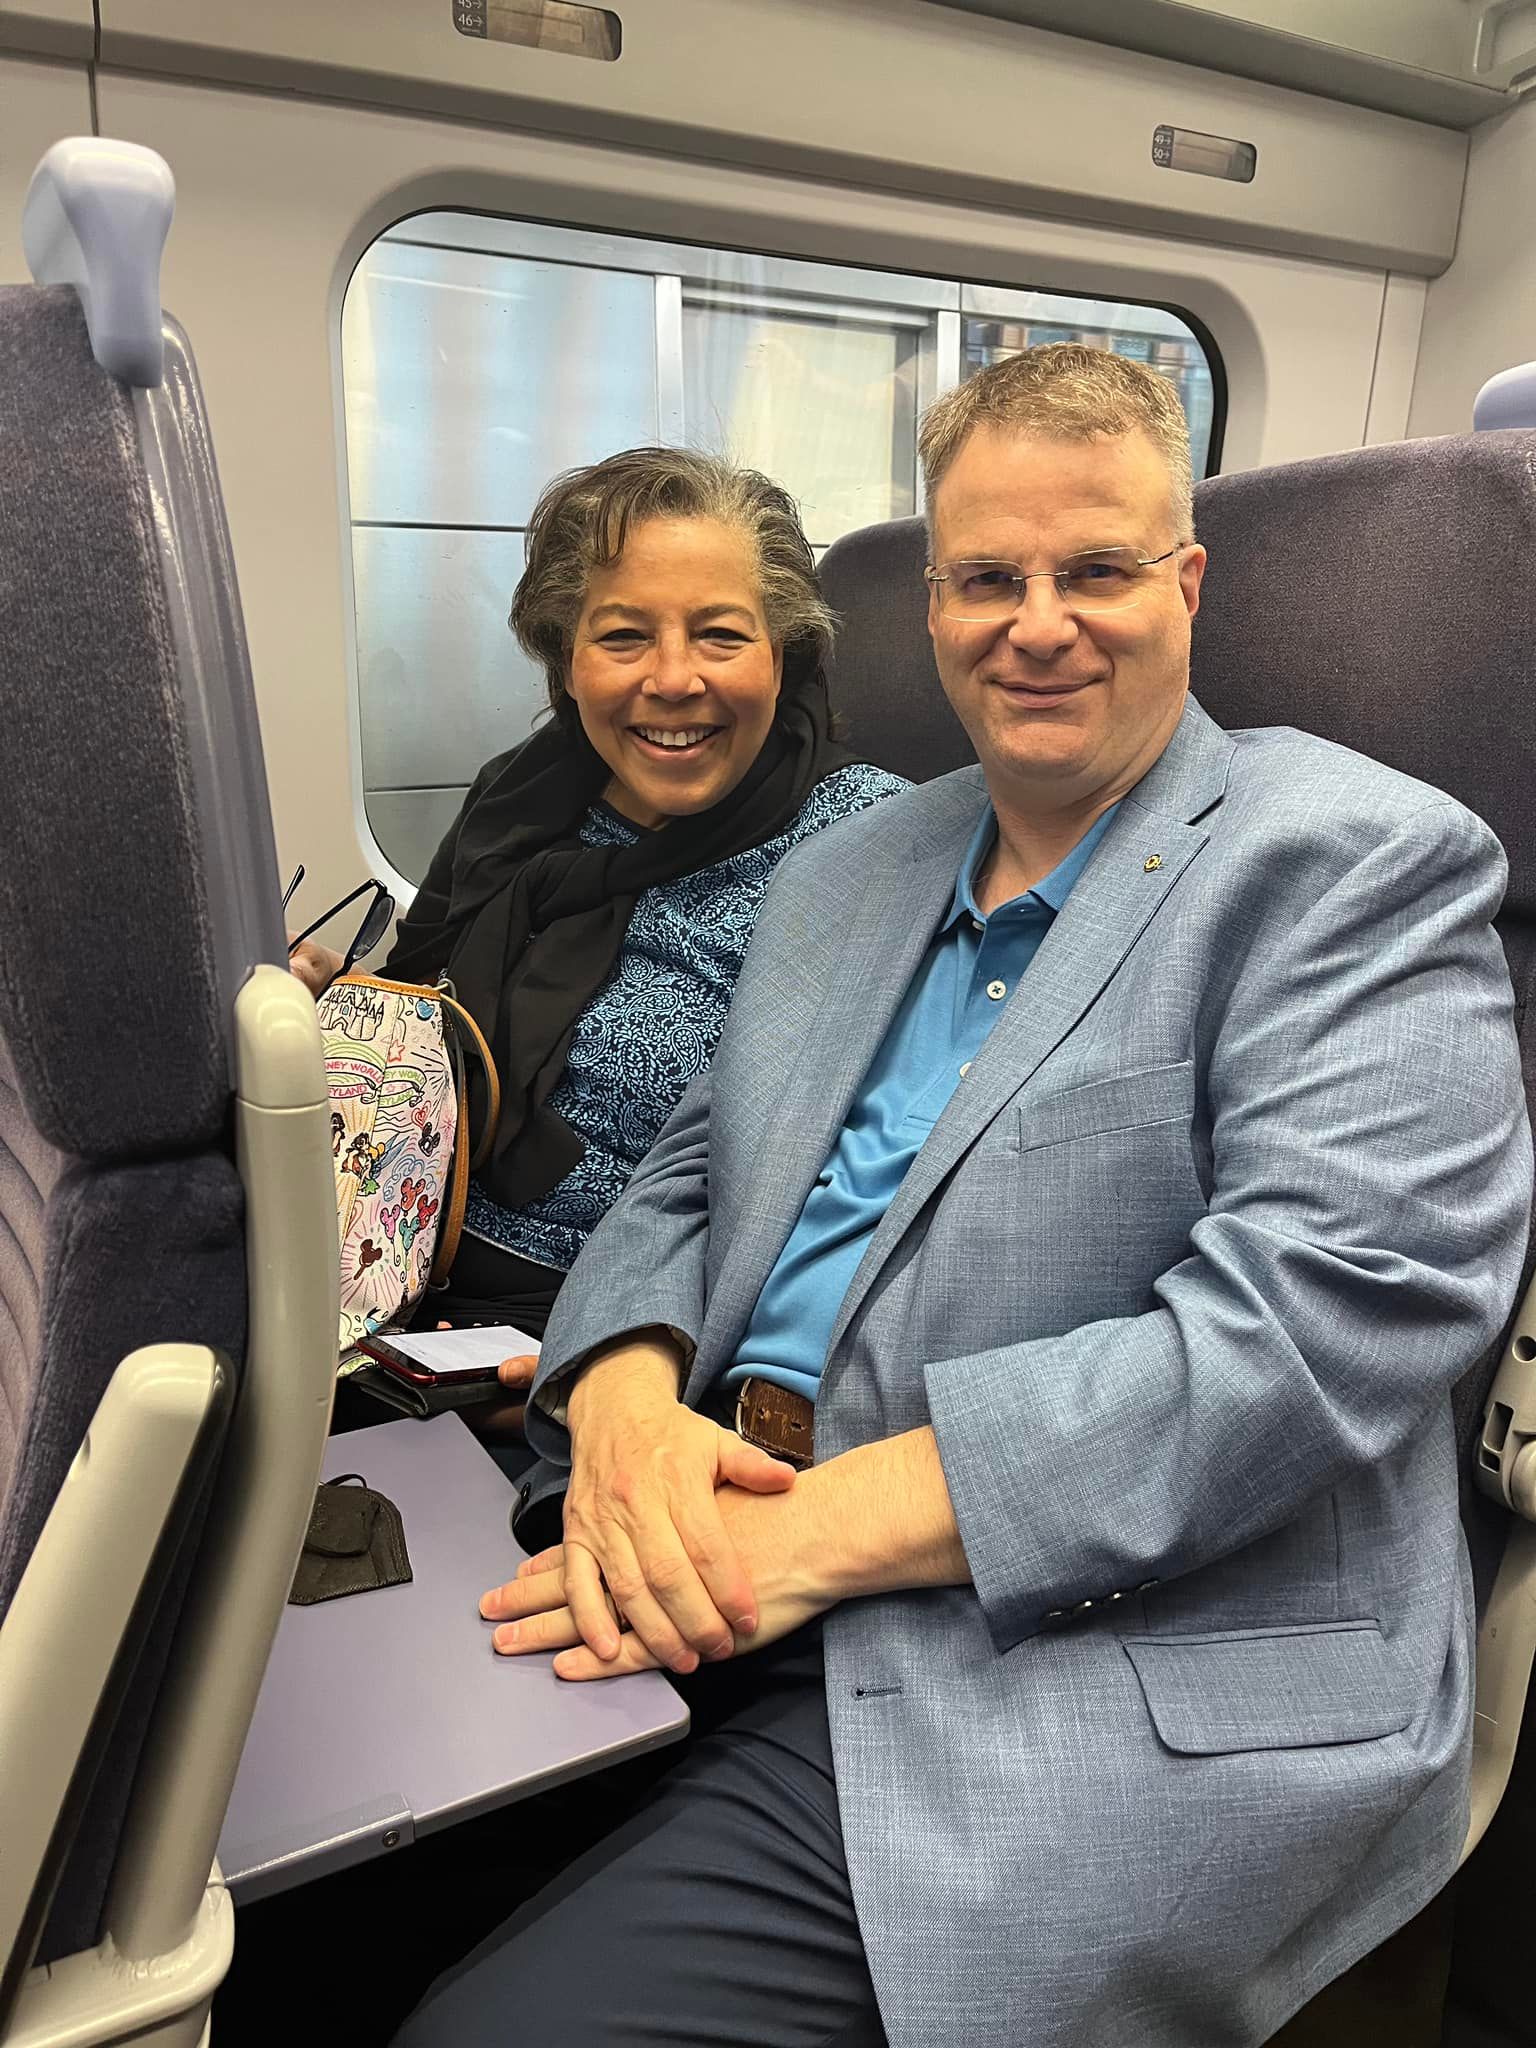 Eve of Lambeth - July 26: Bishop Hughes and her husband David Smedley on the tran from London to Canterbury. KEVIN NICHOLS PHOTO